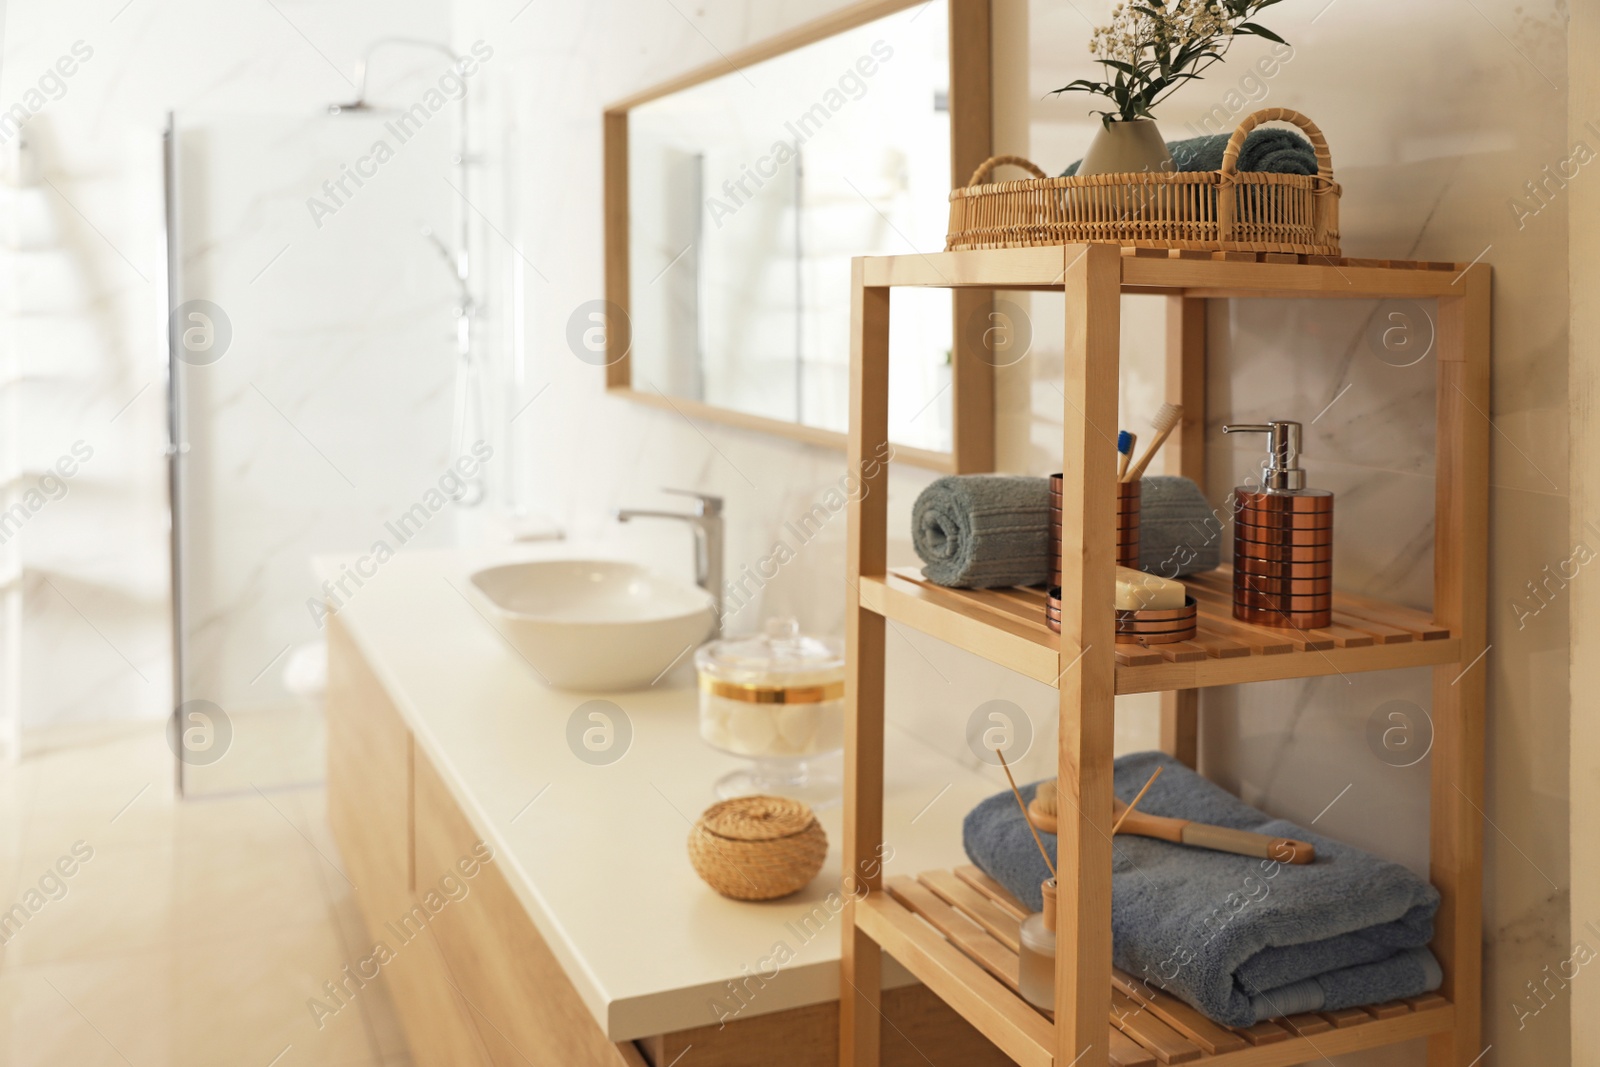 Photo of Shelving unit with toiletries in stylish bathroom interior 